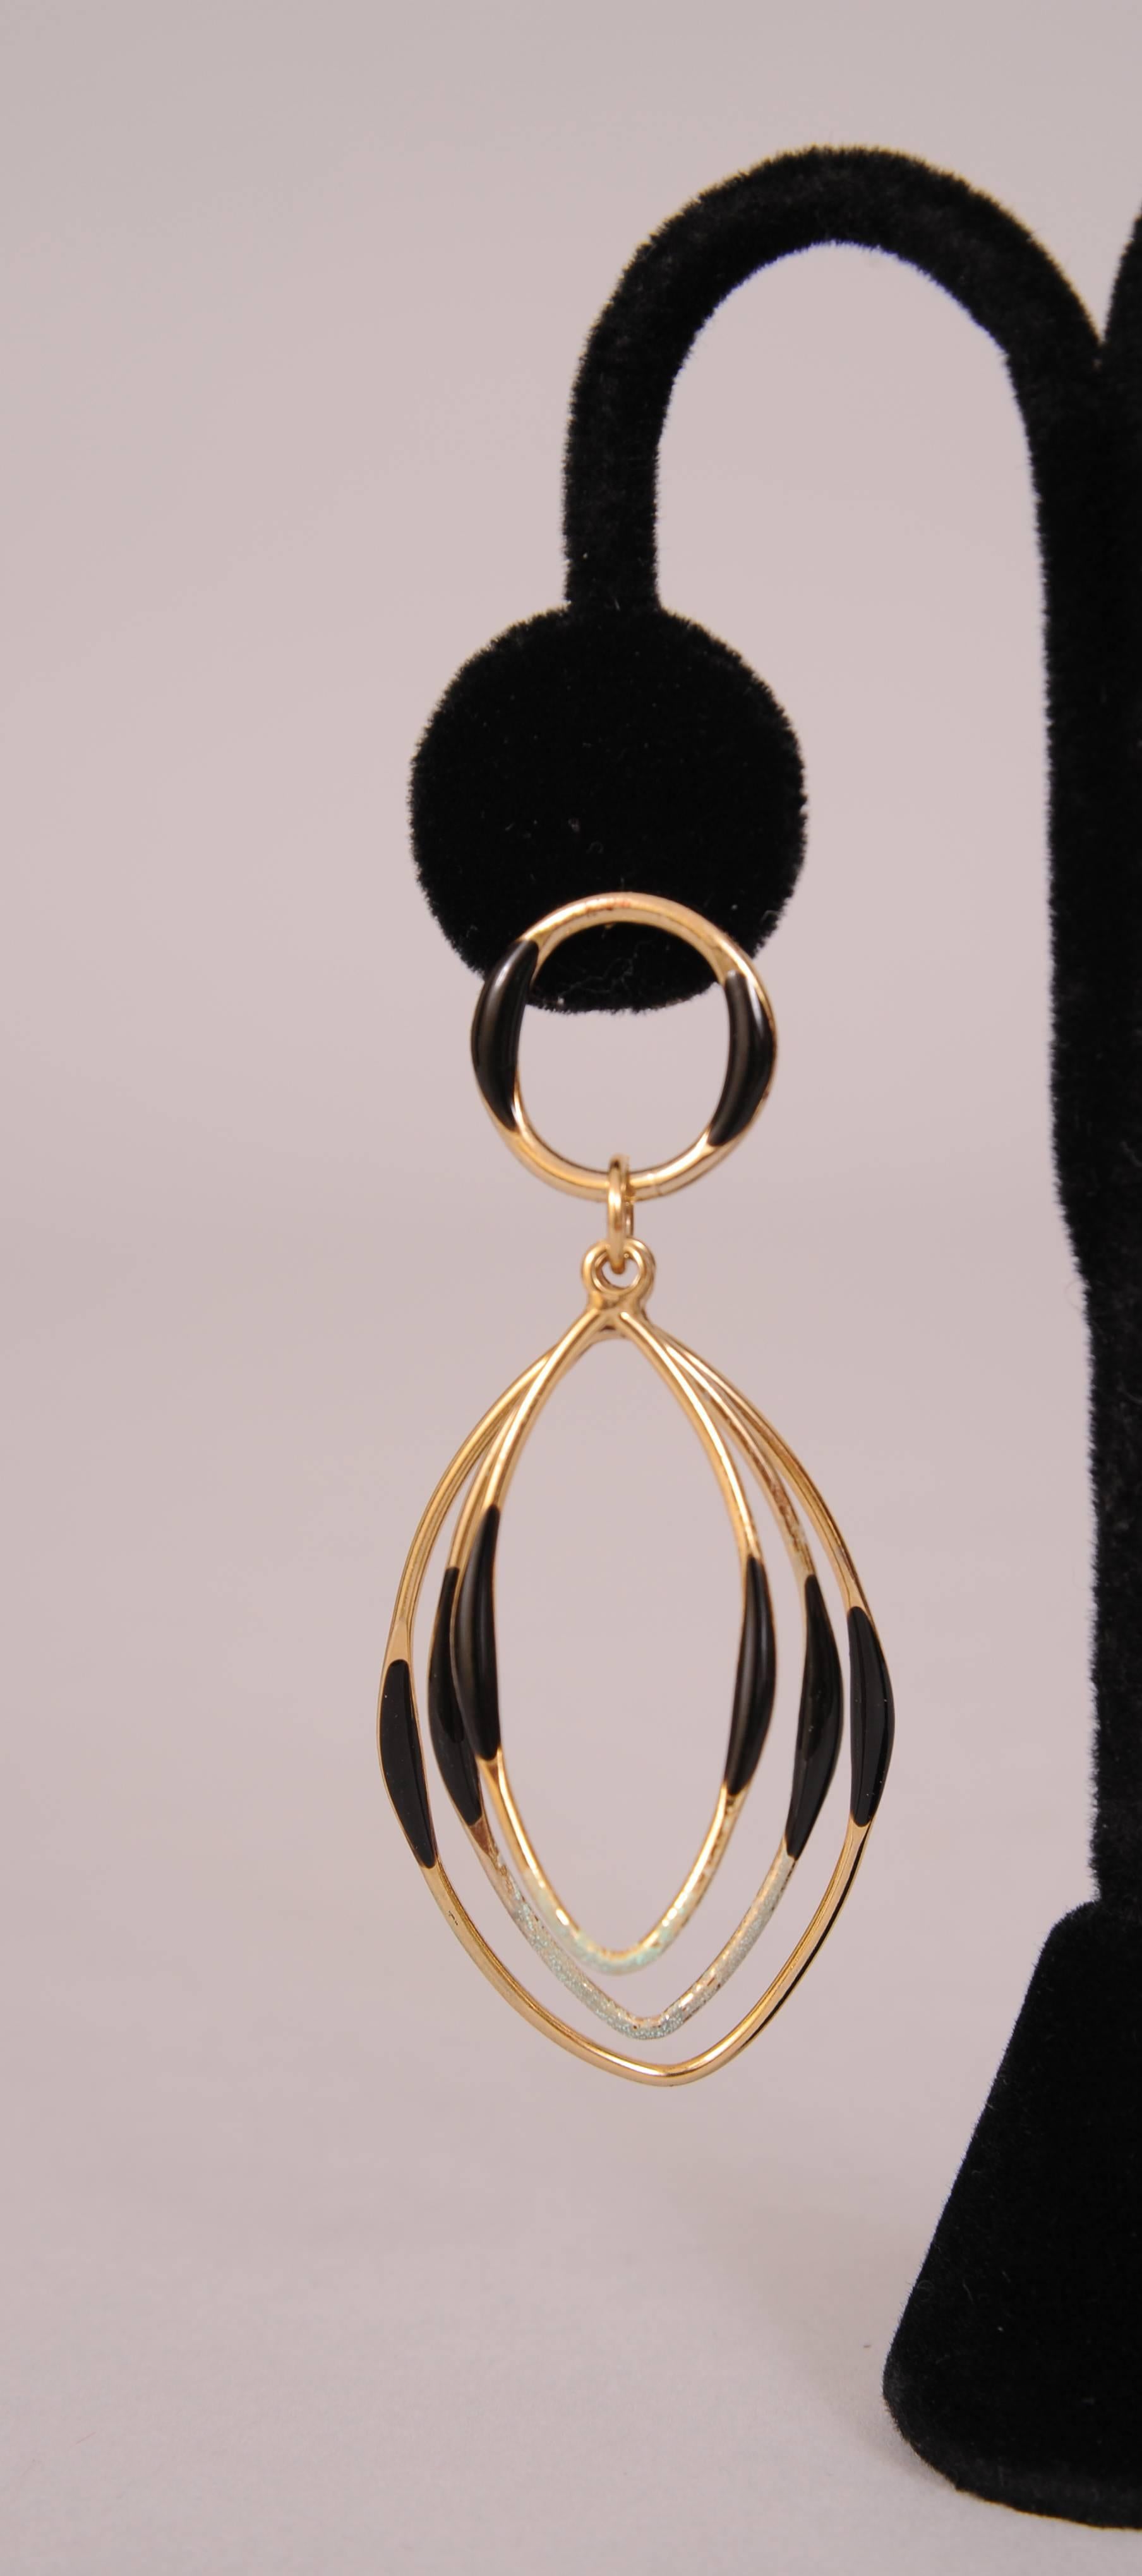 An unusual design makes this pair of 1970's pierced earrings very eye catching. The round hoop at the top supports three graduated oval hoops suspended by a ring. All of these pieces have black enamel decoration on the sides. Light weight and with